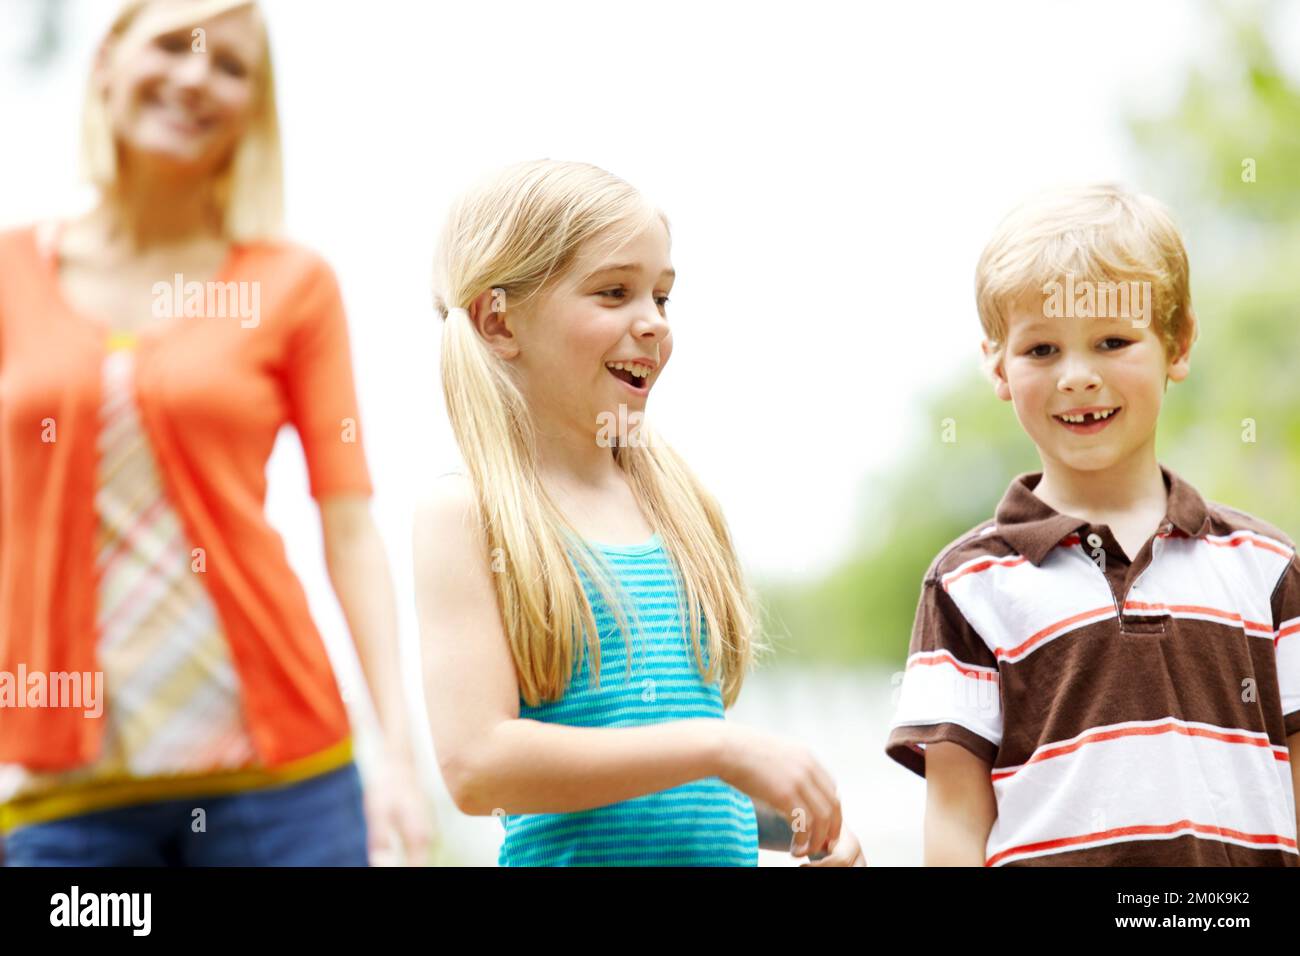 Out for a day with mom. Two cute young children spending time outdoors with their mother. Stock Photo